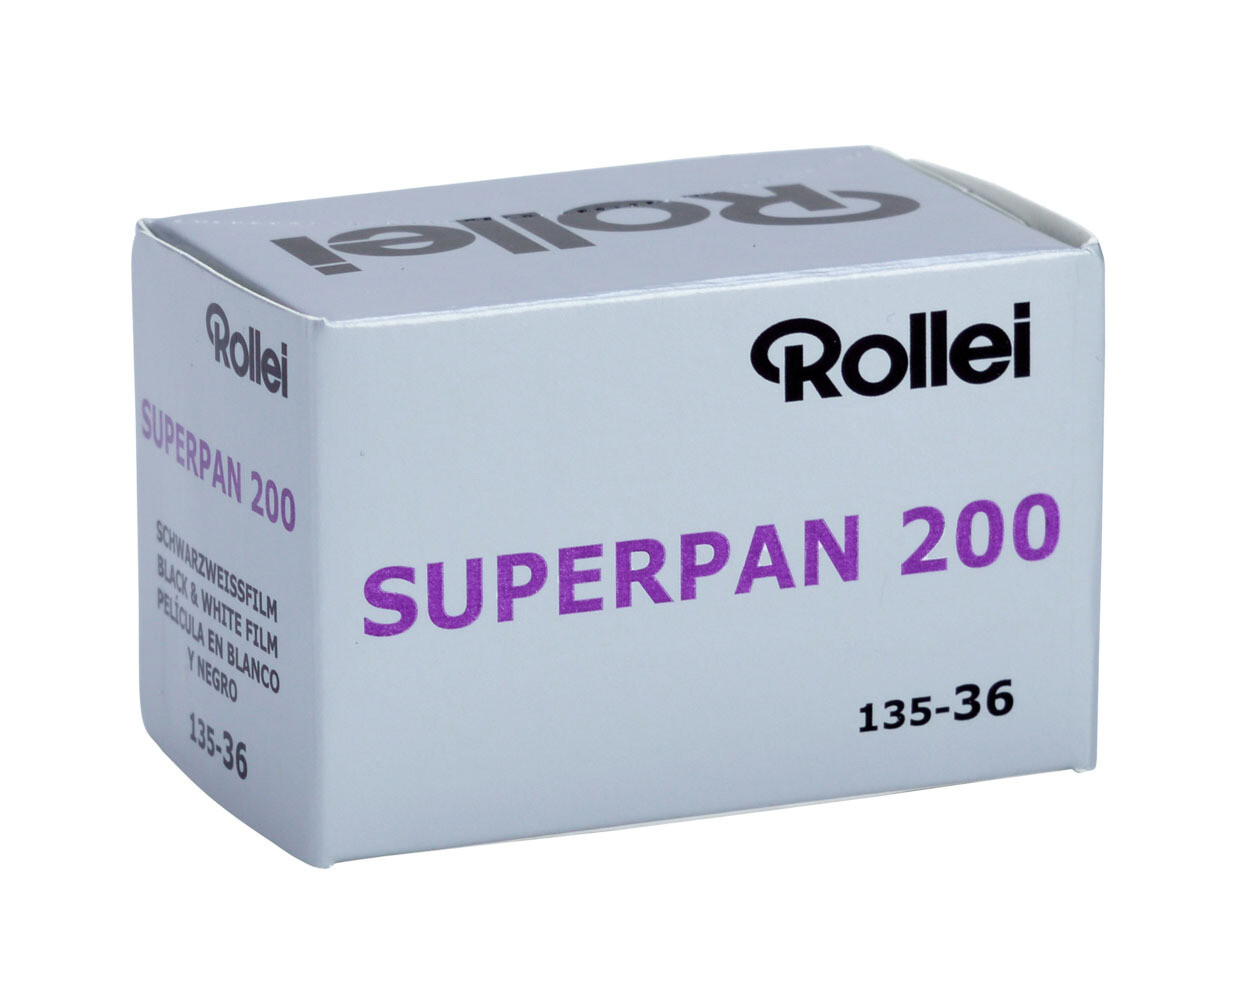 Rollei Superpan 200 roll film 35mm film 135-36 Expired  06/2025 - Delivery time 3-8 workdays